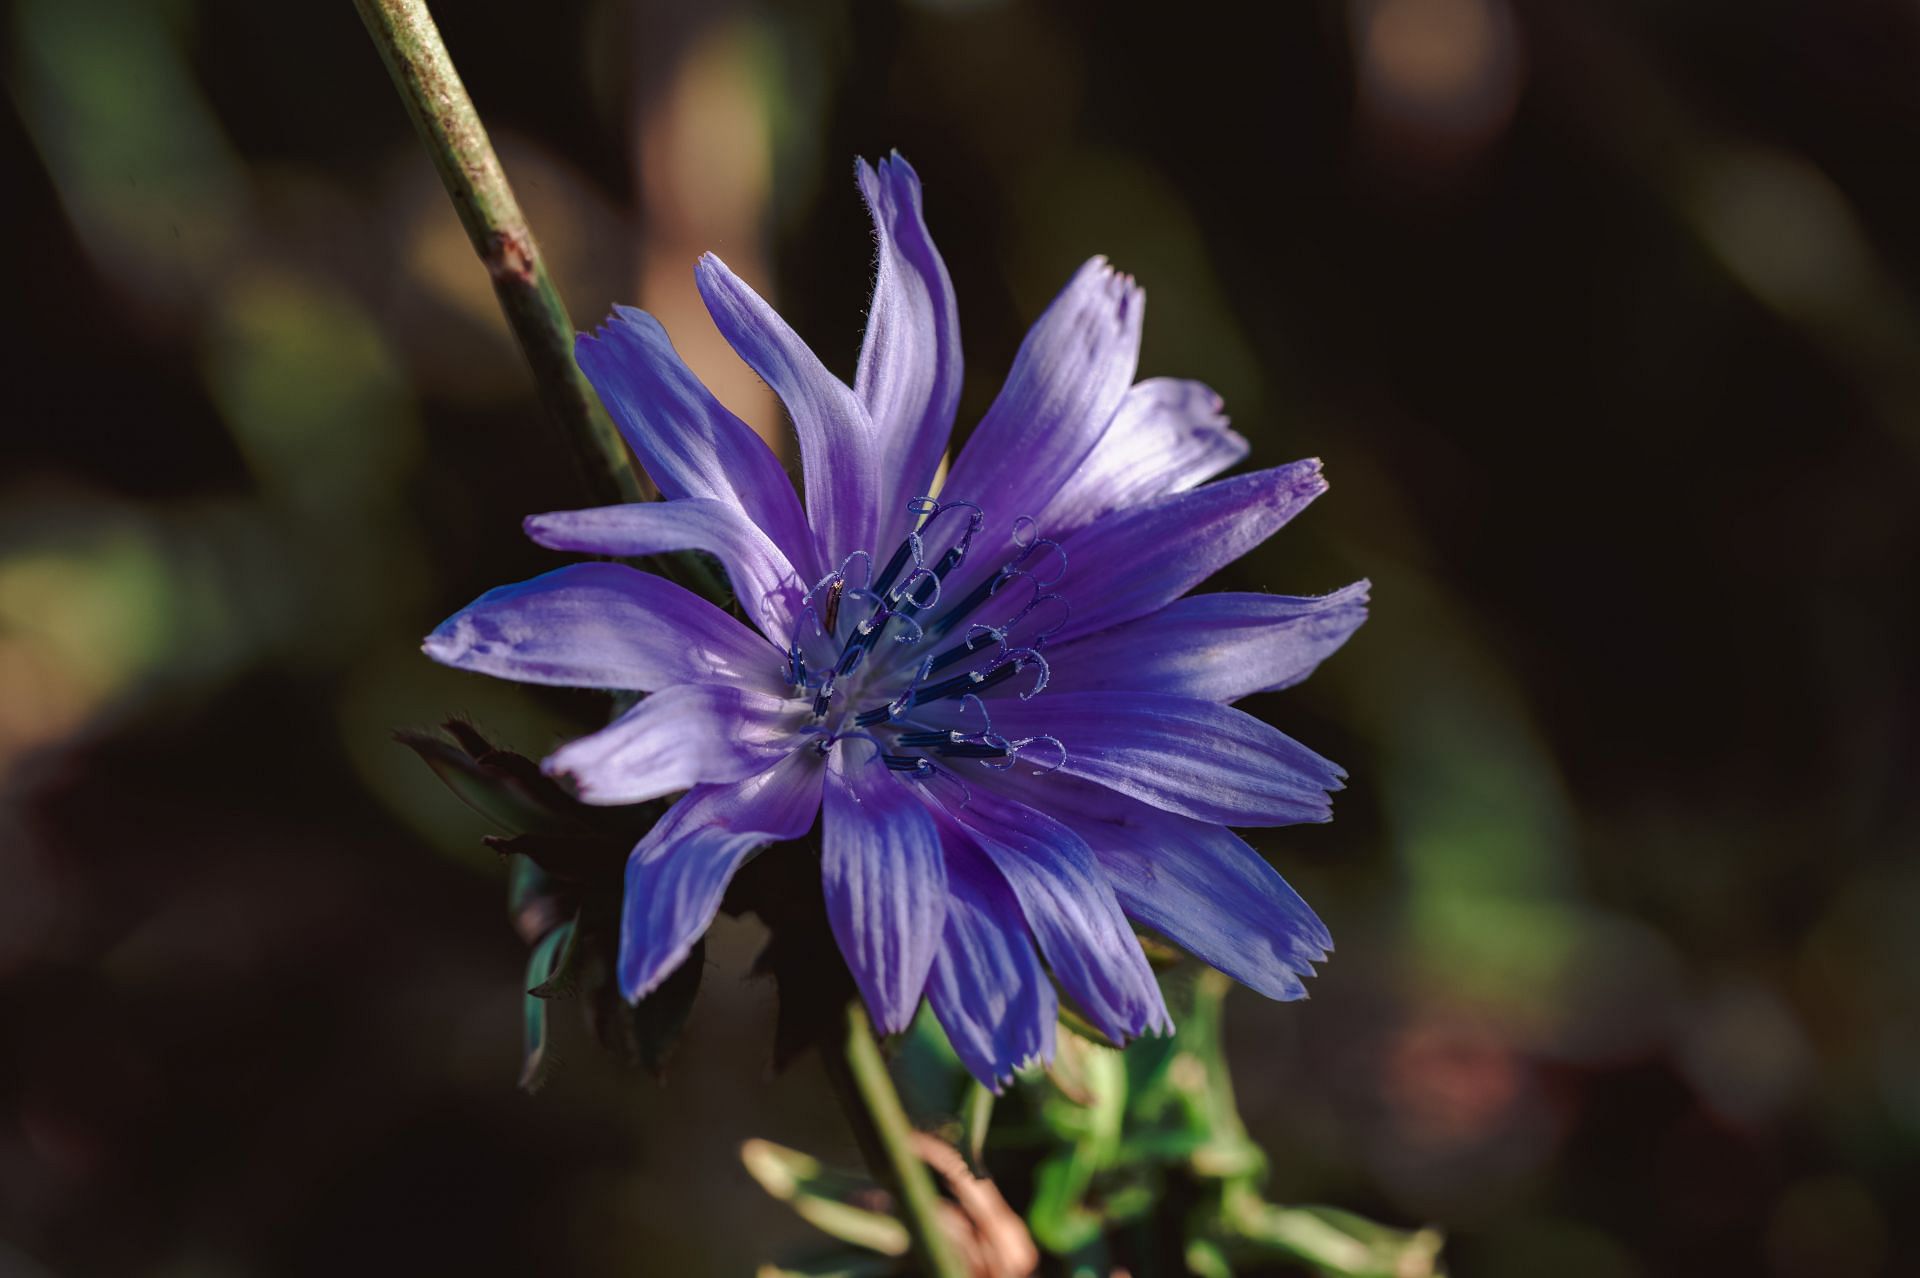 Chicory extracts alleviate oxidative stress. (Image via Pexels/ Hans D)